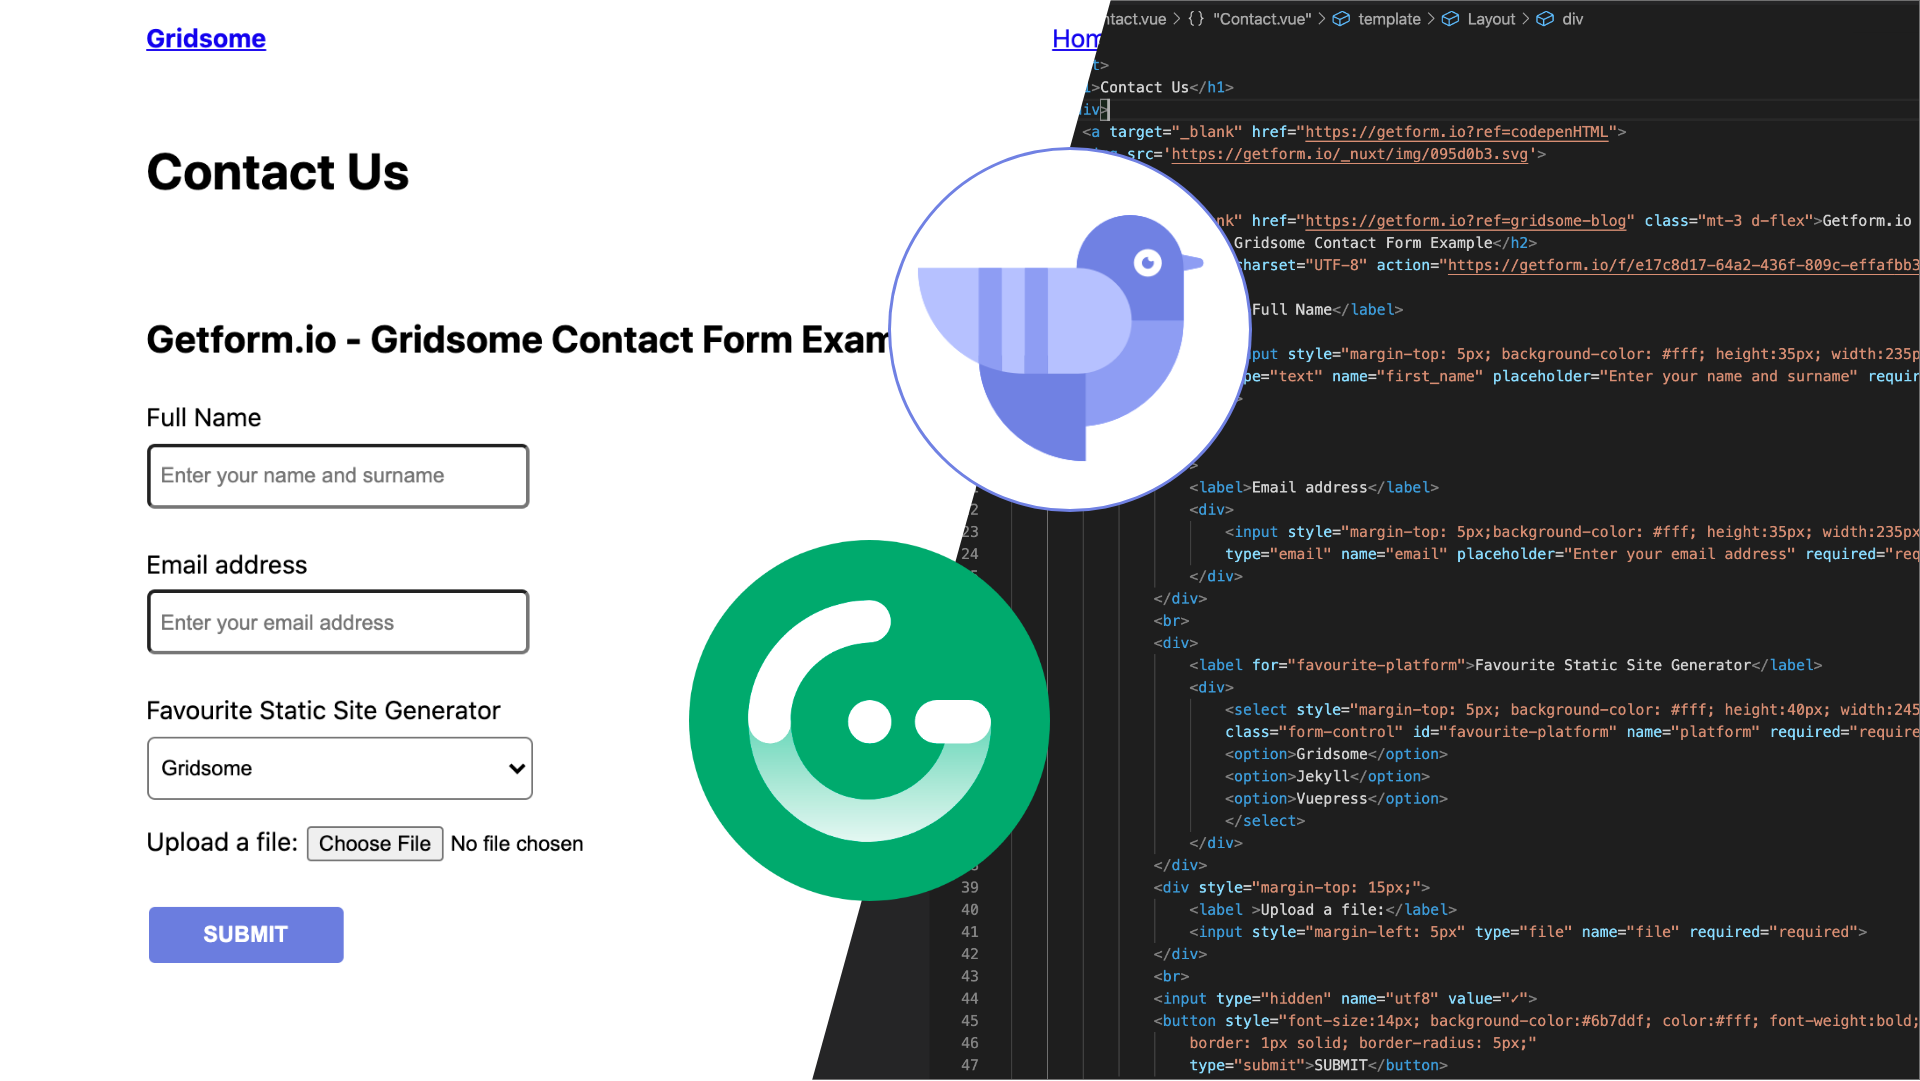 How to setup a contact form in Gridsome using Getform